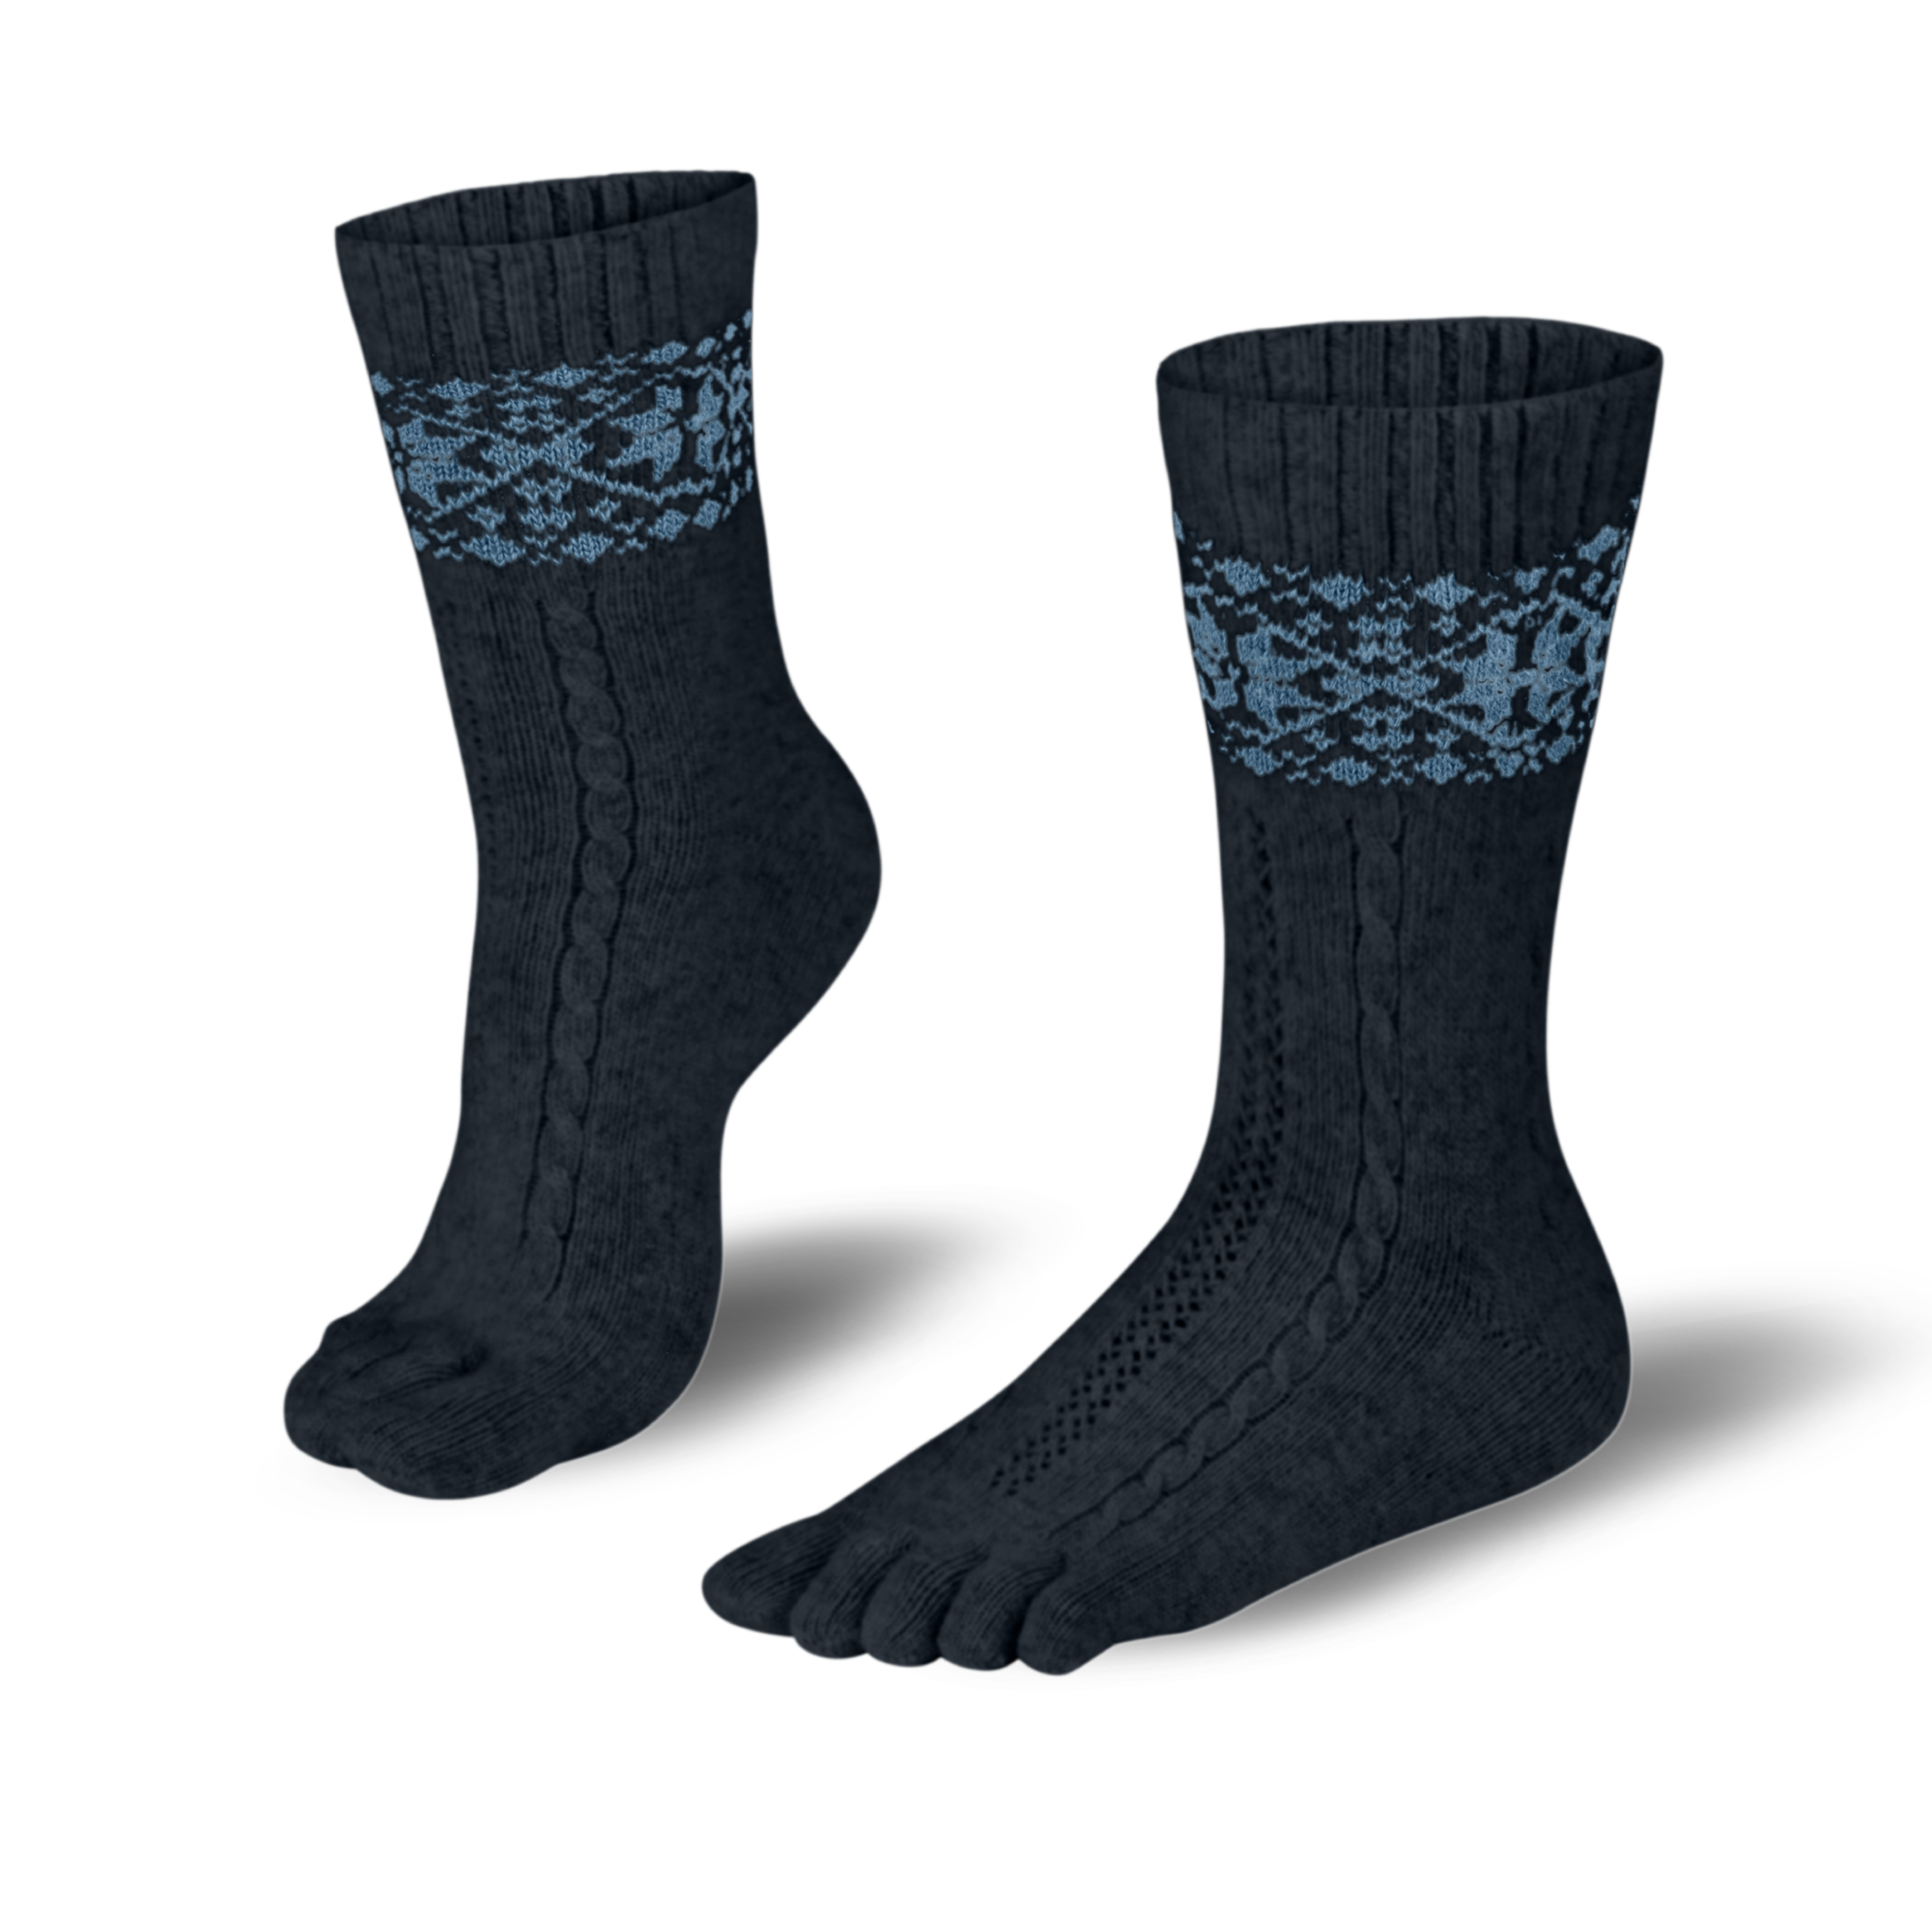 Knitido warm merino & cashmere toe socks with snow patches pattern in anthracite/blue 